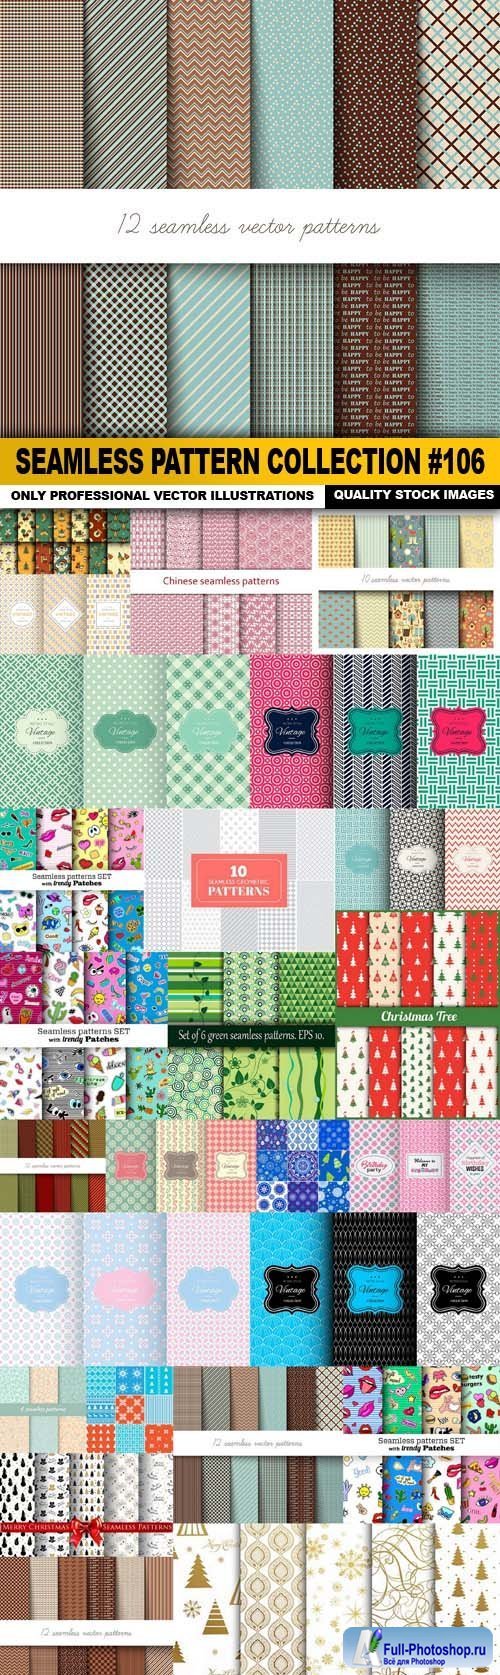 Seamless Pattern Collection #106 - 25 Vector